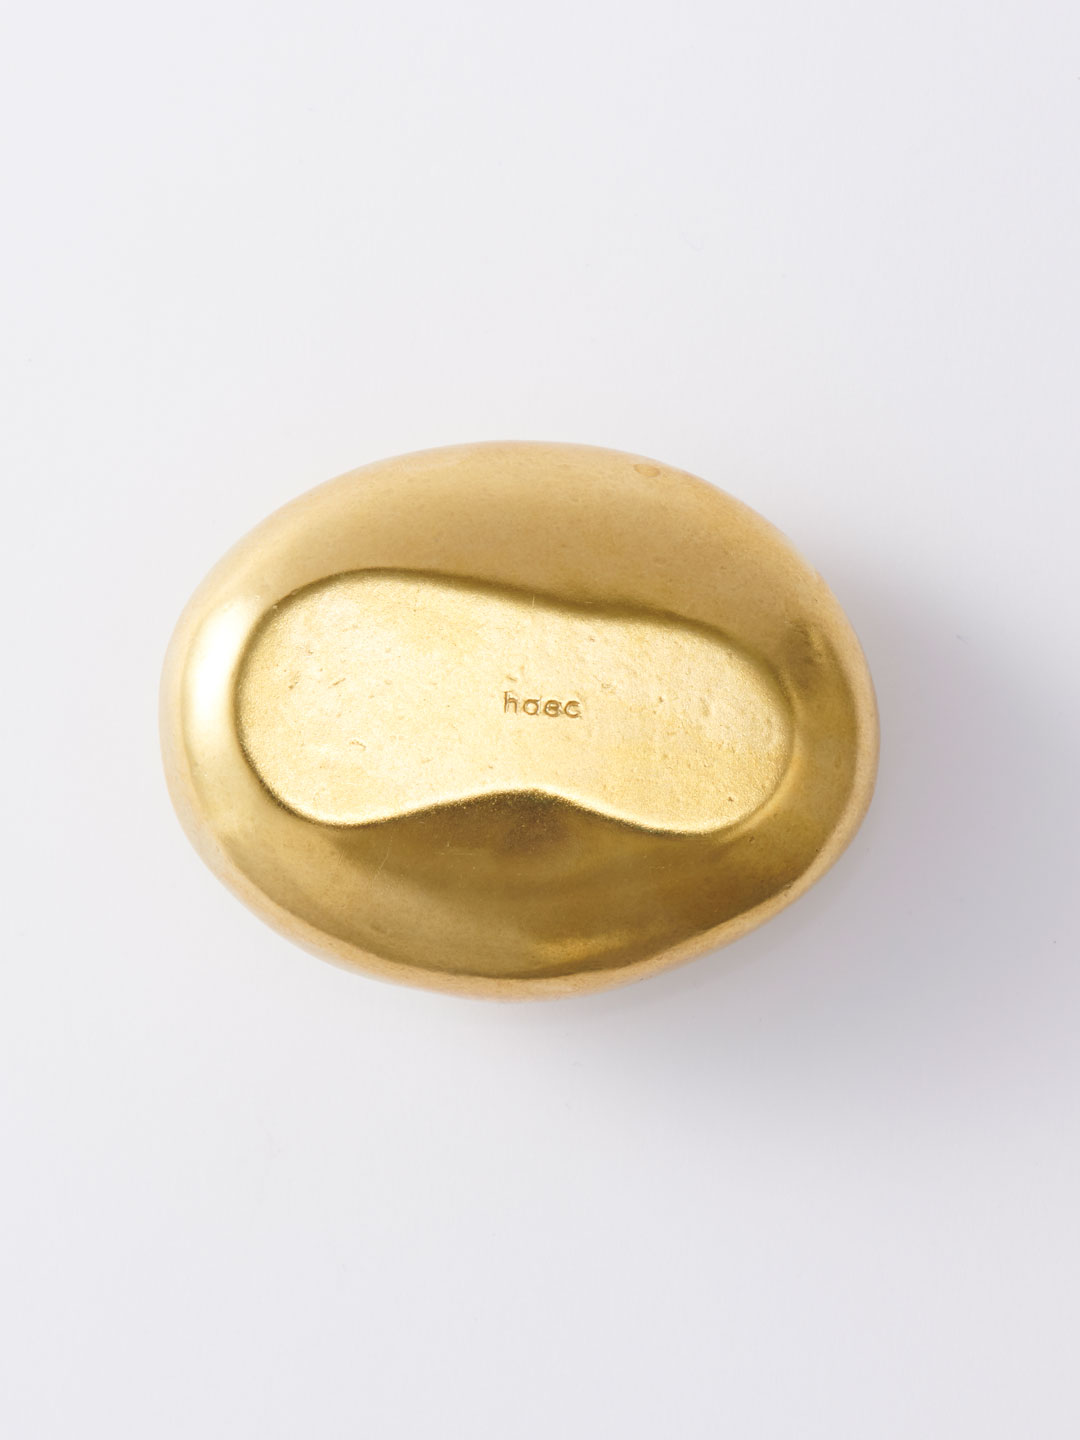 Paper Weight 001 - Gold